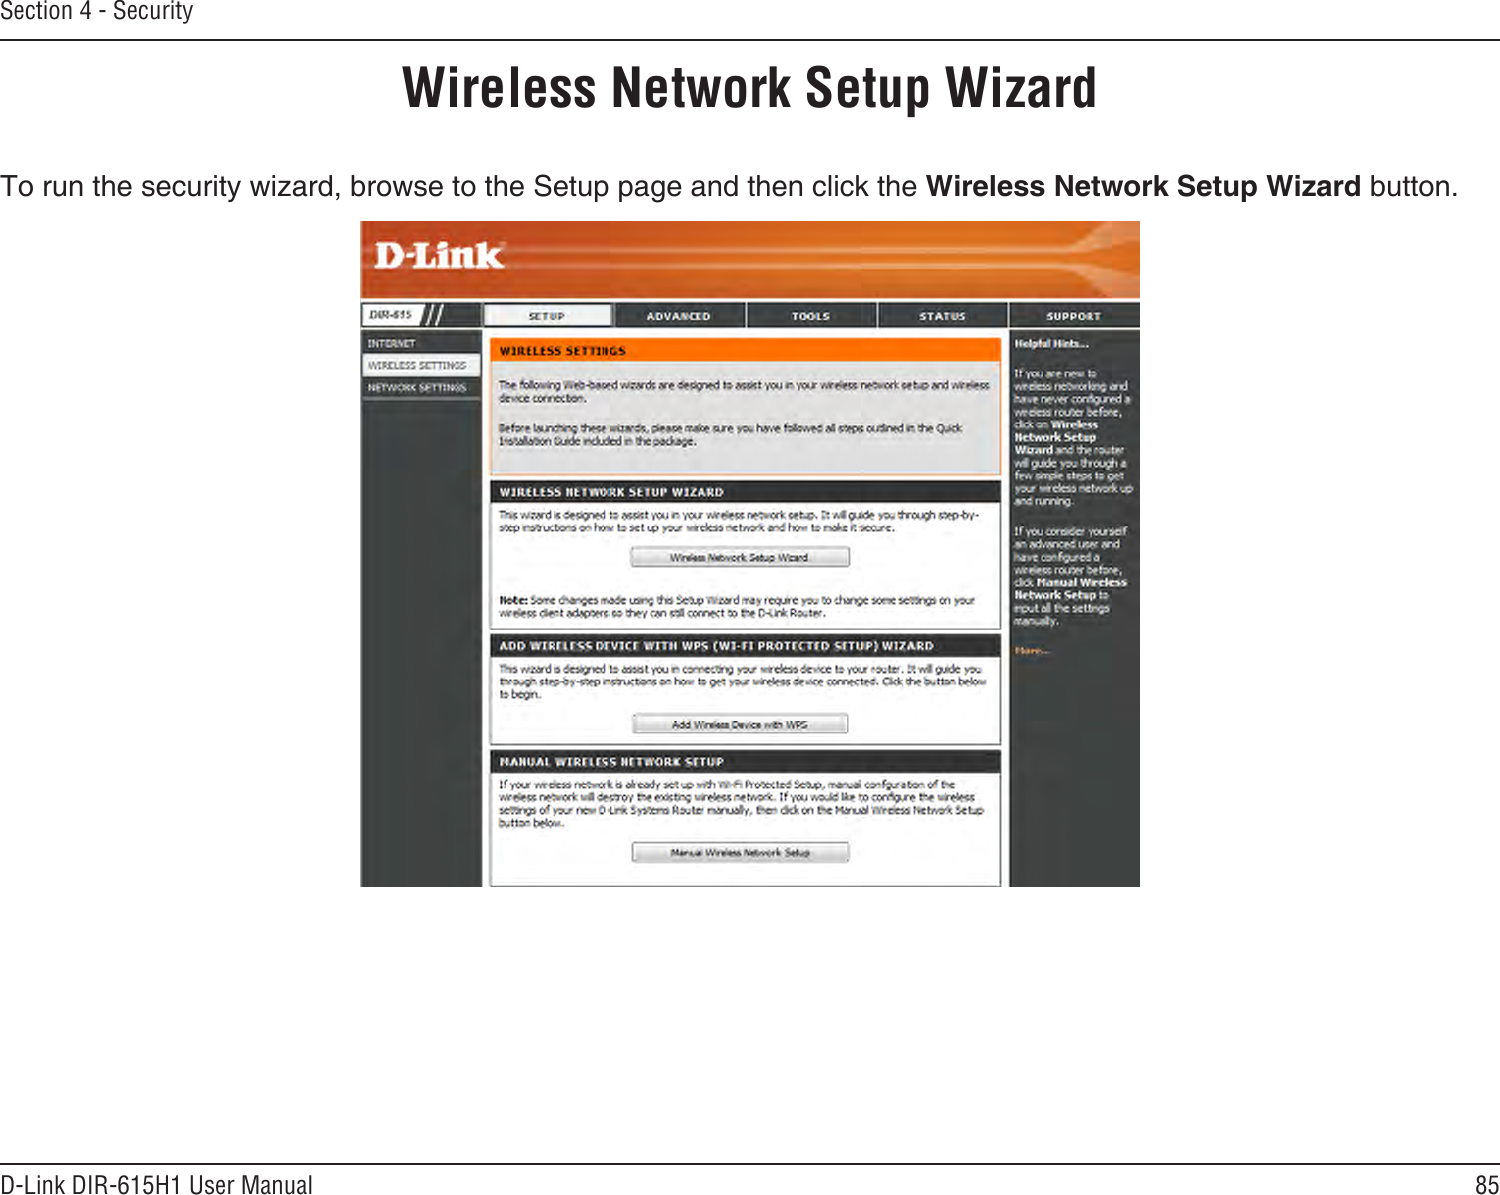 85D-Link DIR-615H1 User ManualSection 4 - SecurityWireless Network Setup WizardTo run the security wizard, browse to the Setup page and then click the Wireless Network Setup Wizard button. 